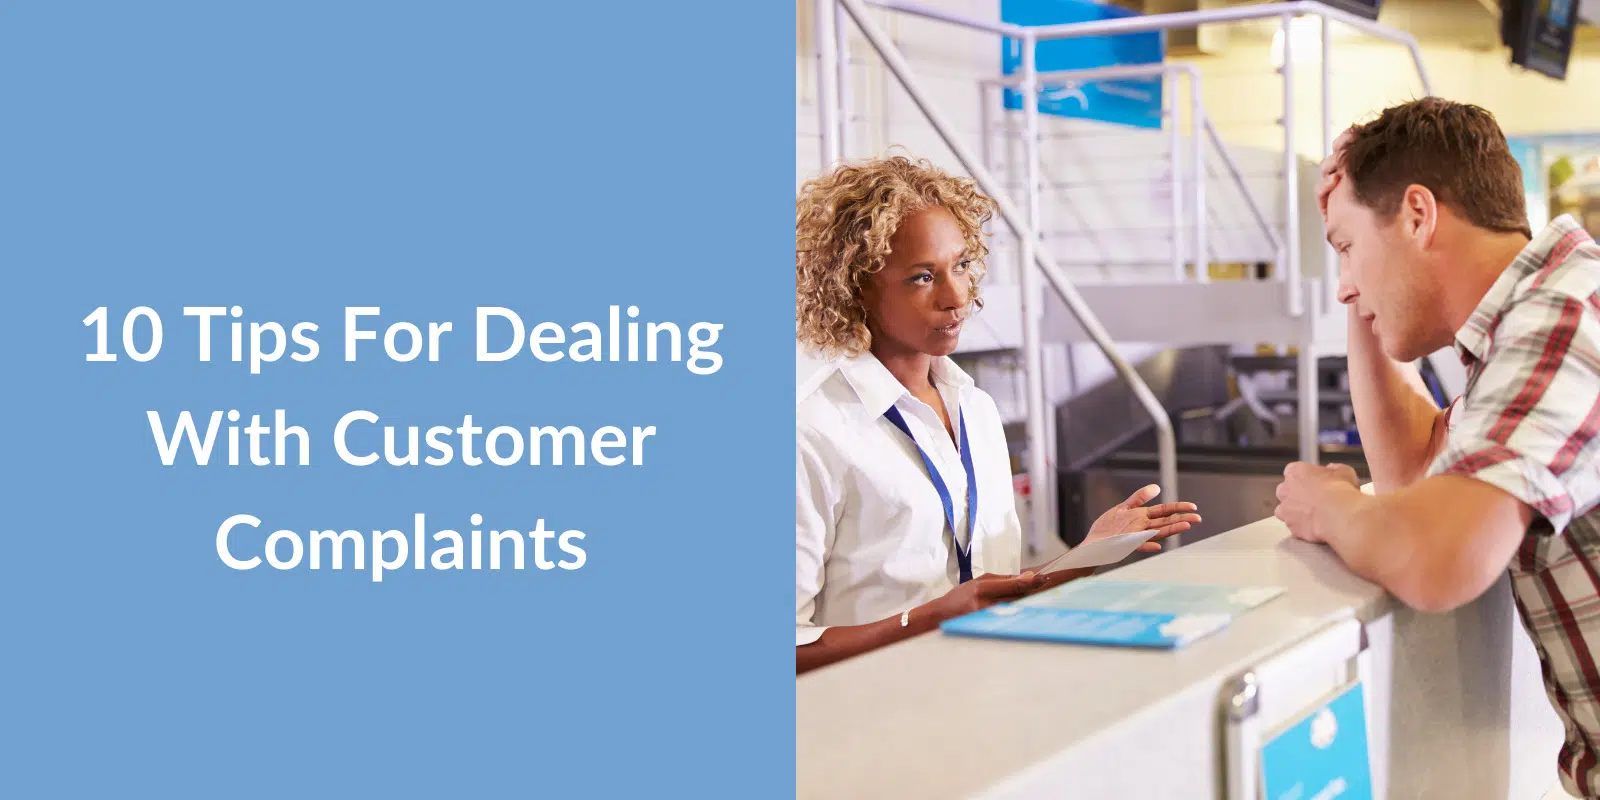 10 Tips For Dealing With Customer Complaints The Thriving Small Business